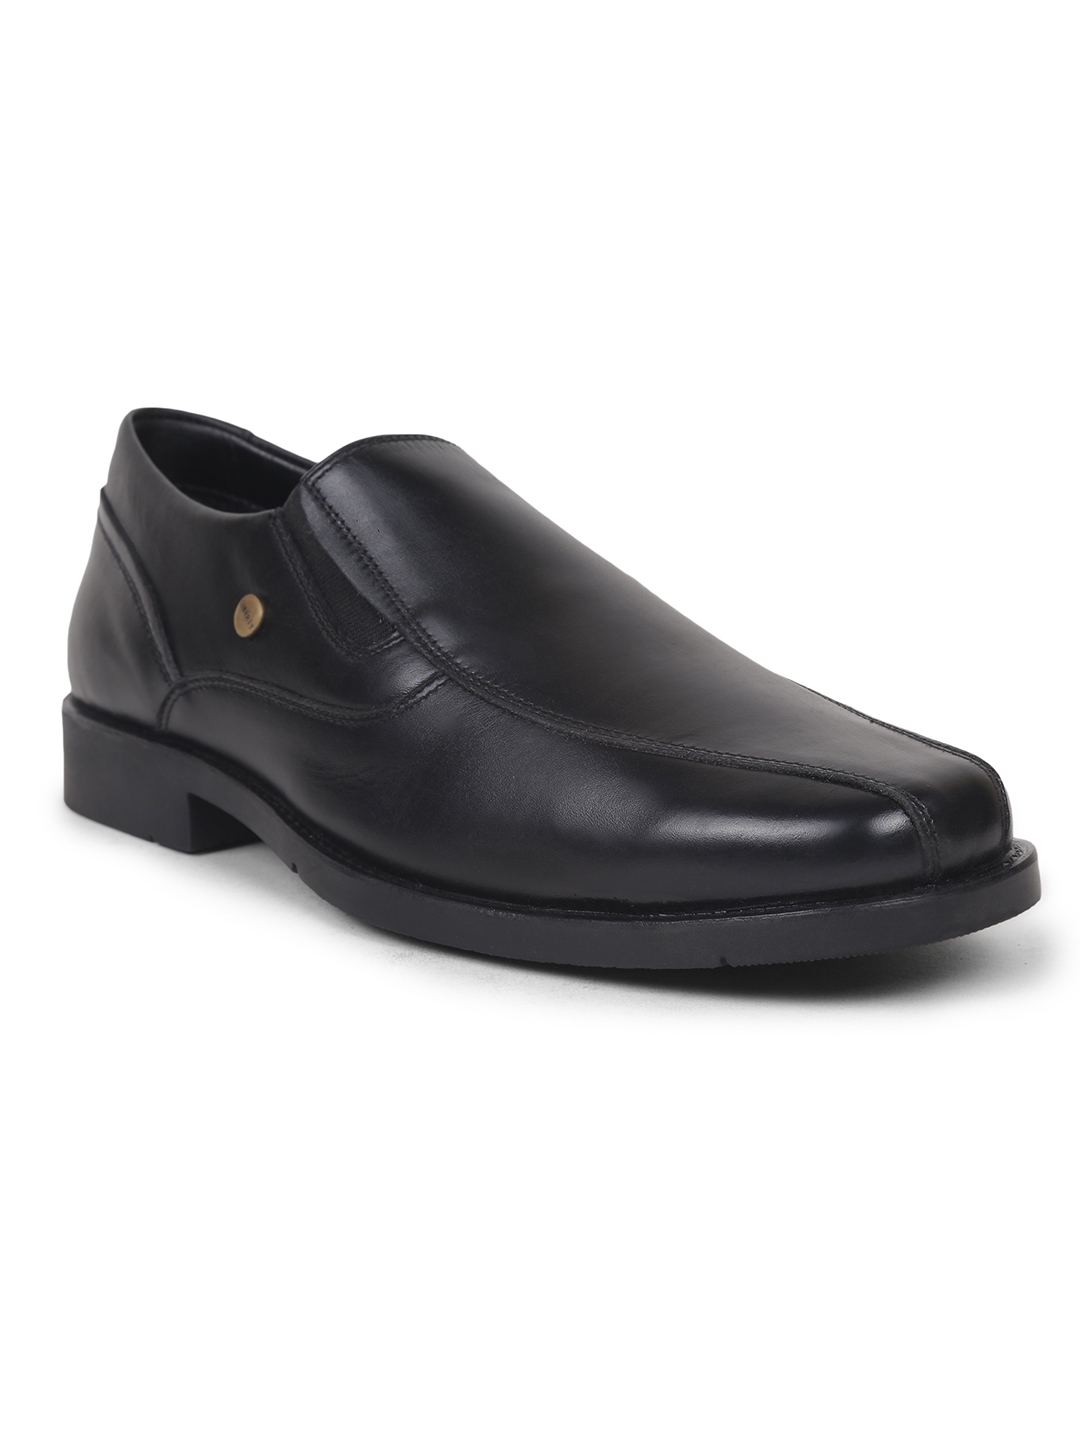 Liberty | Fortune By Liberty ECO-02E Black Formal Shoes for Men